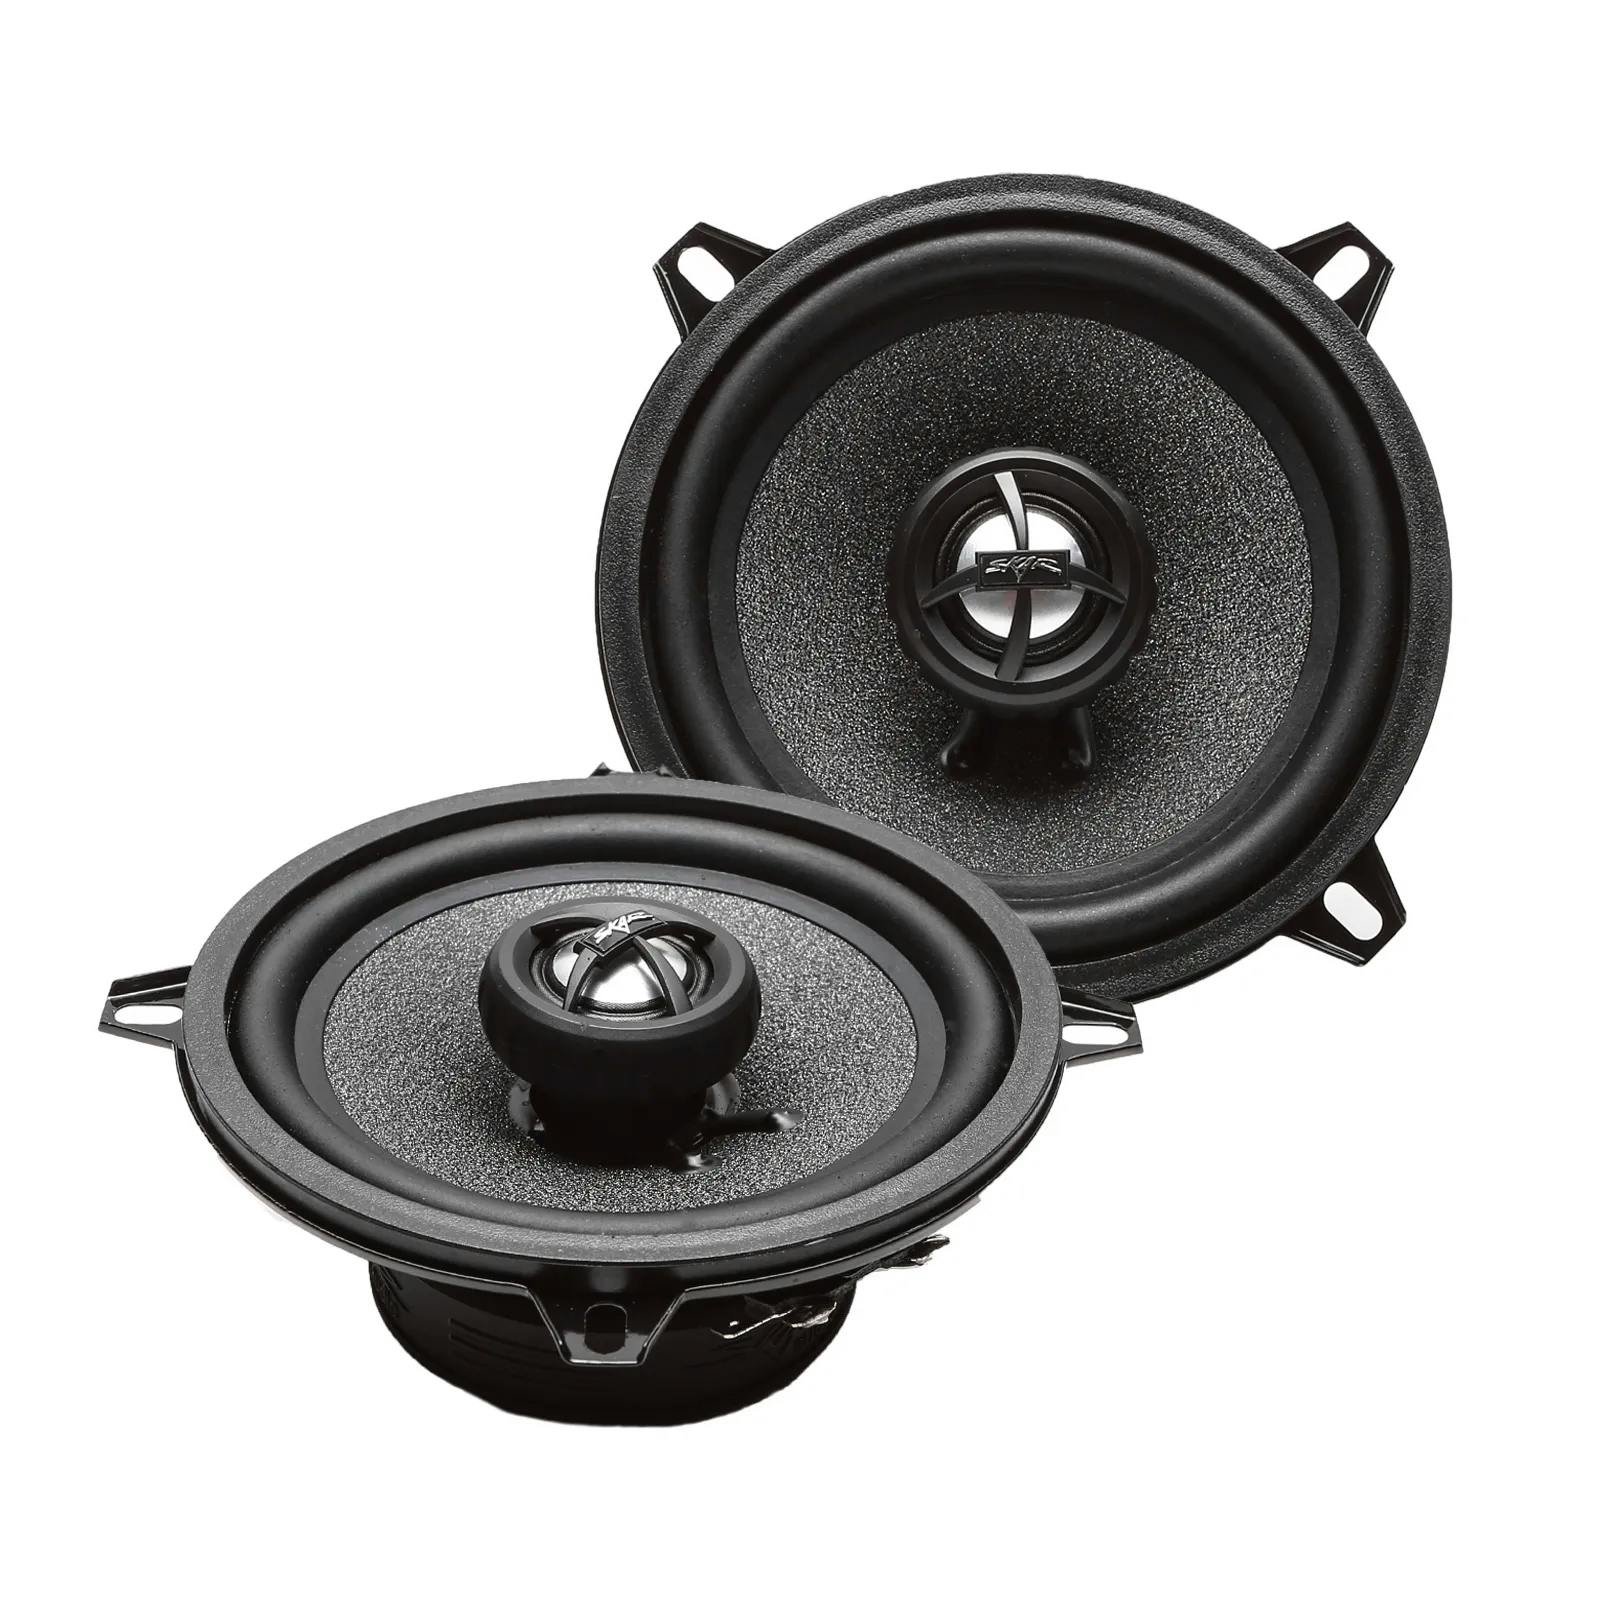 Featured Product Photo for RPX525 | 5.25" 150 Watt Coaxial Car Speakers - Pair